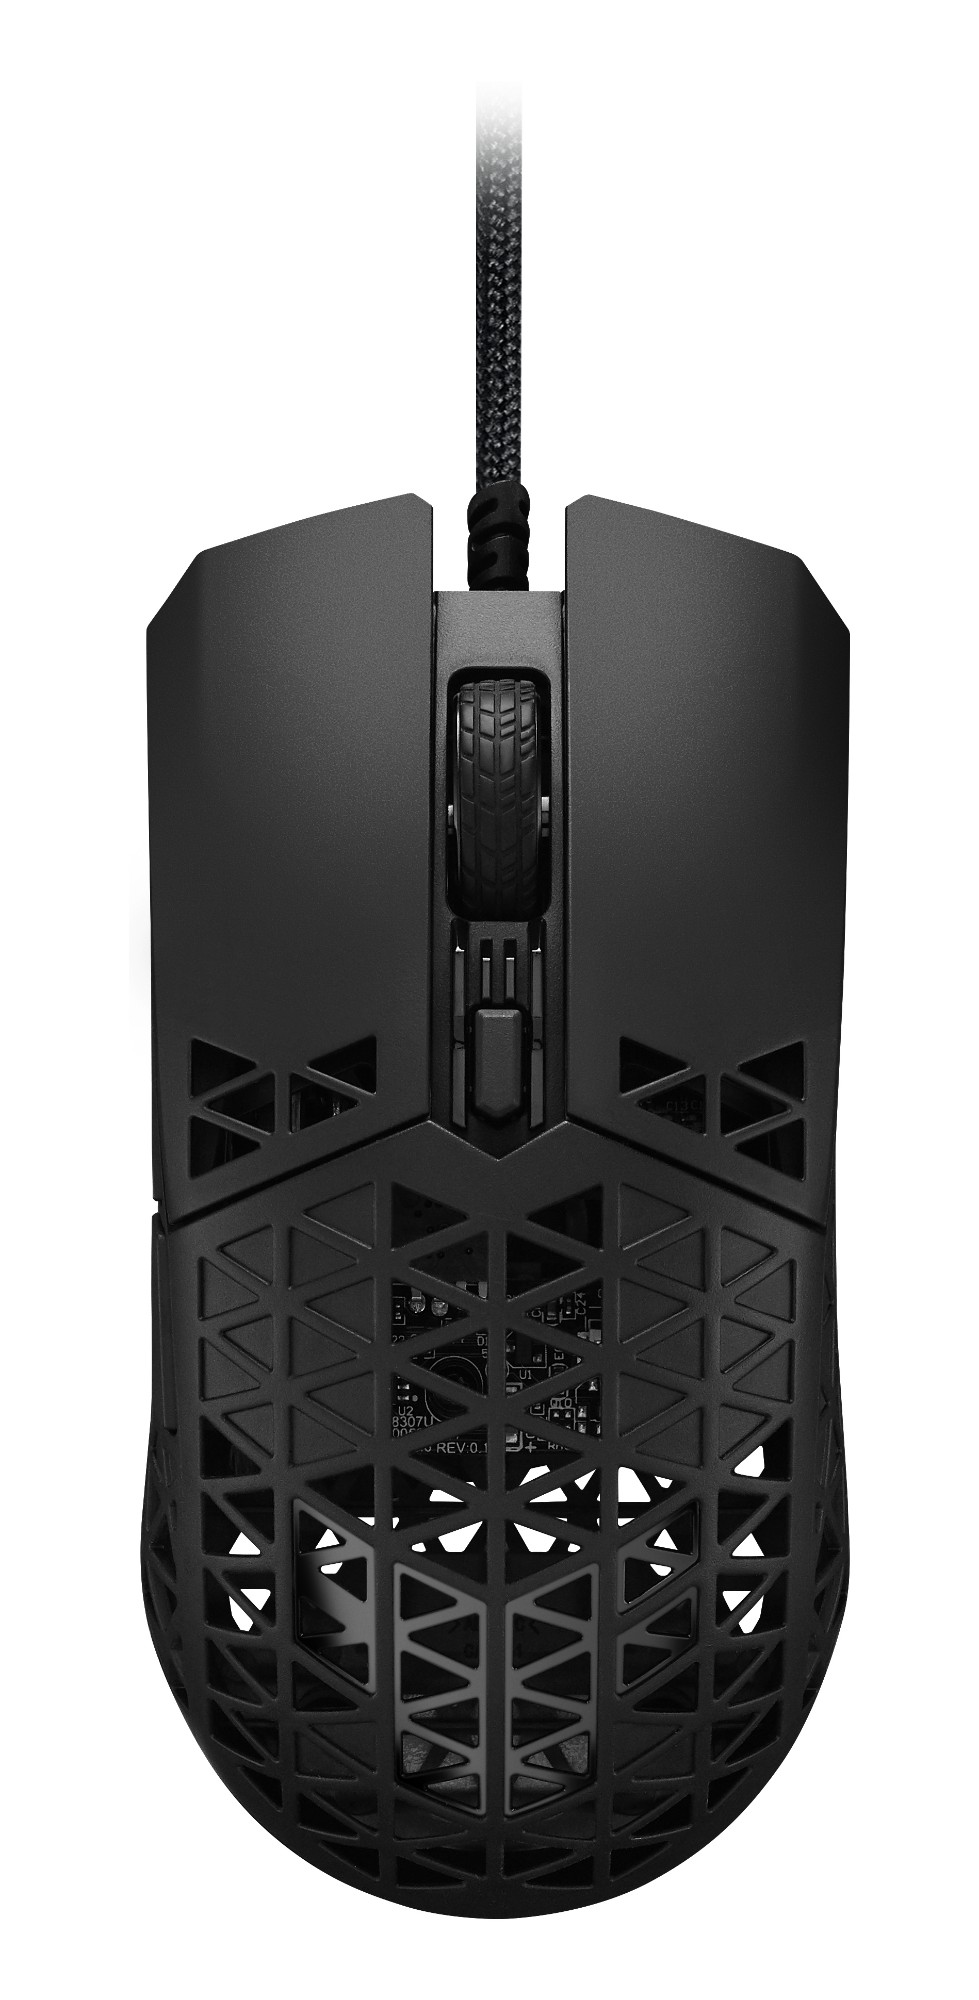 ASUS TUF Gaming M4 Air mouse Ambidextrous USB Type-A Optical 16000 DPI